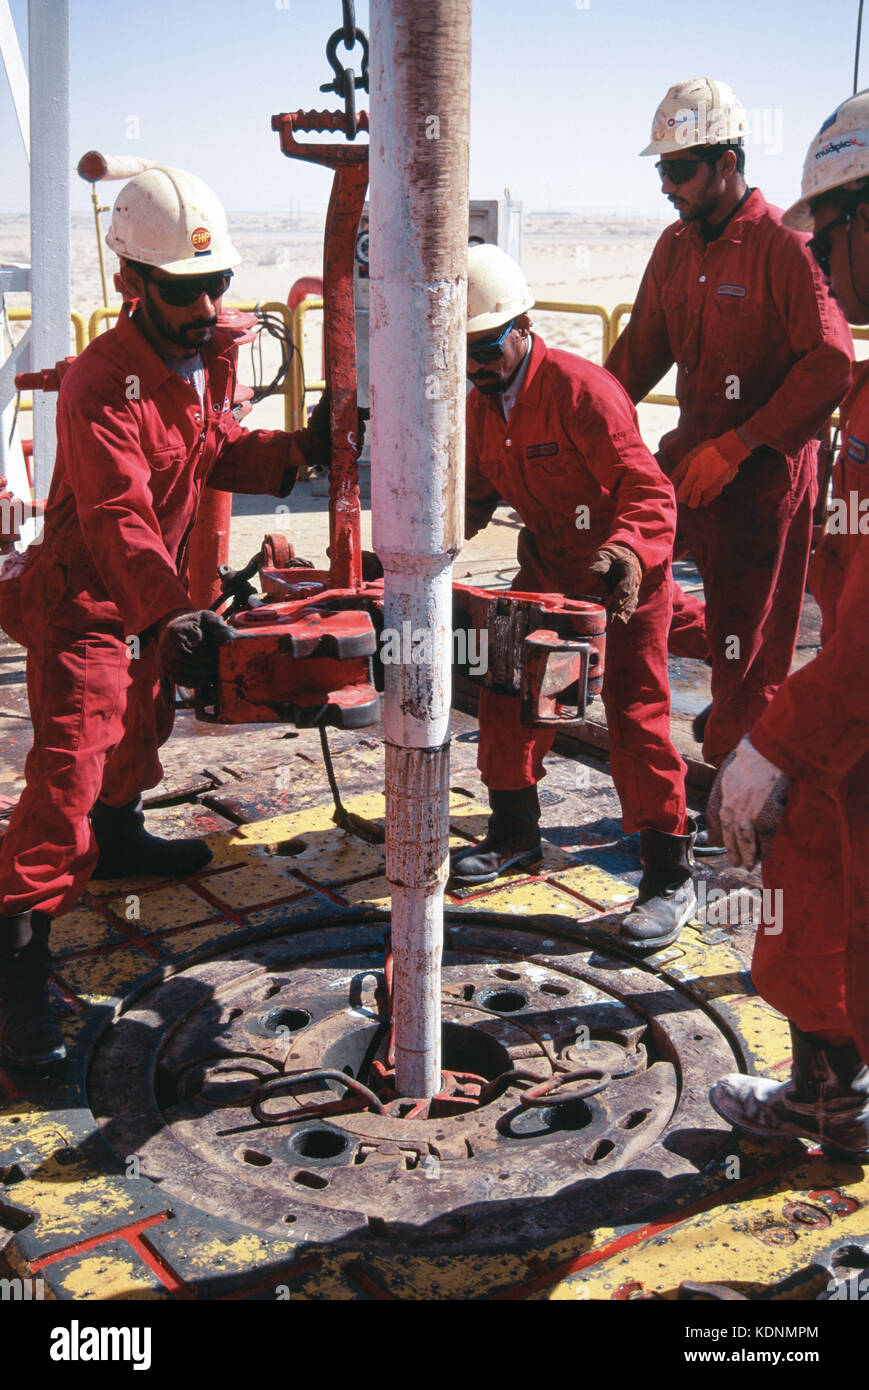 An oil rig exploring for oil and gas in the deserts of Saudi Arabia at Abqaiq Stock Photo